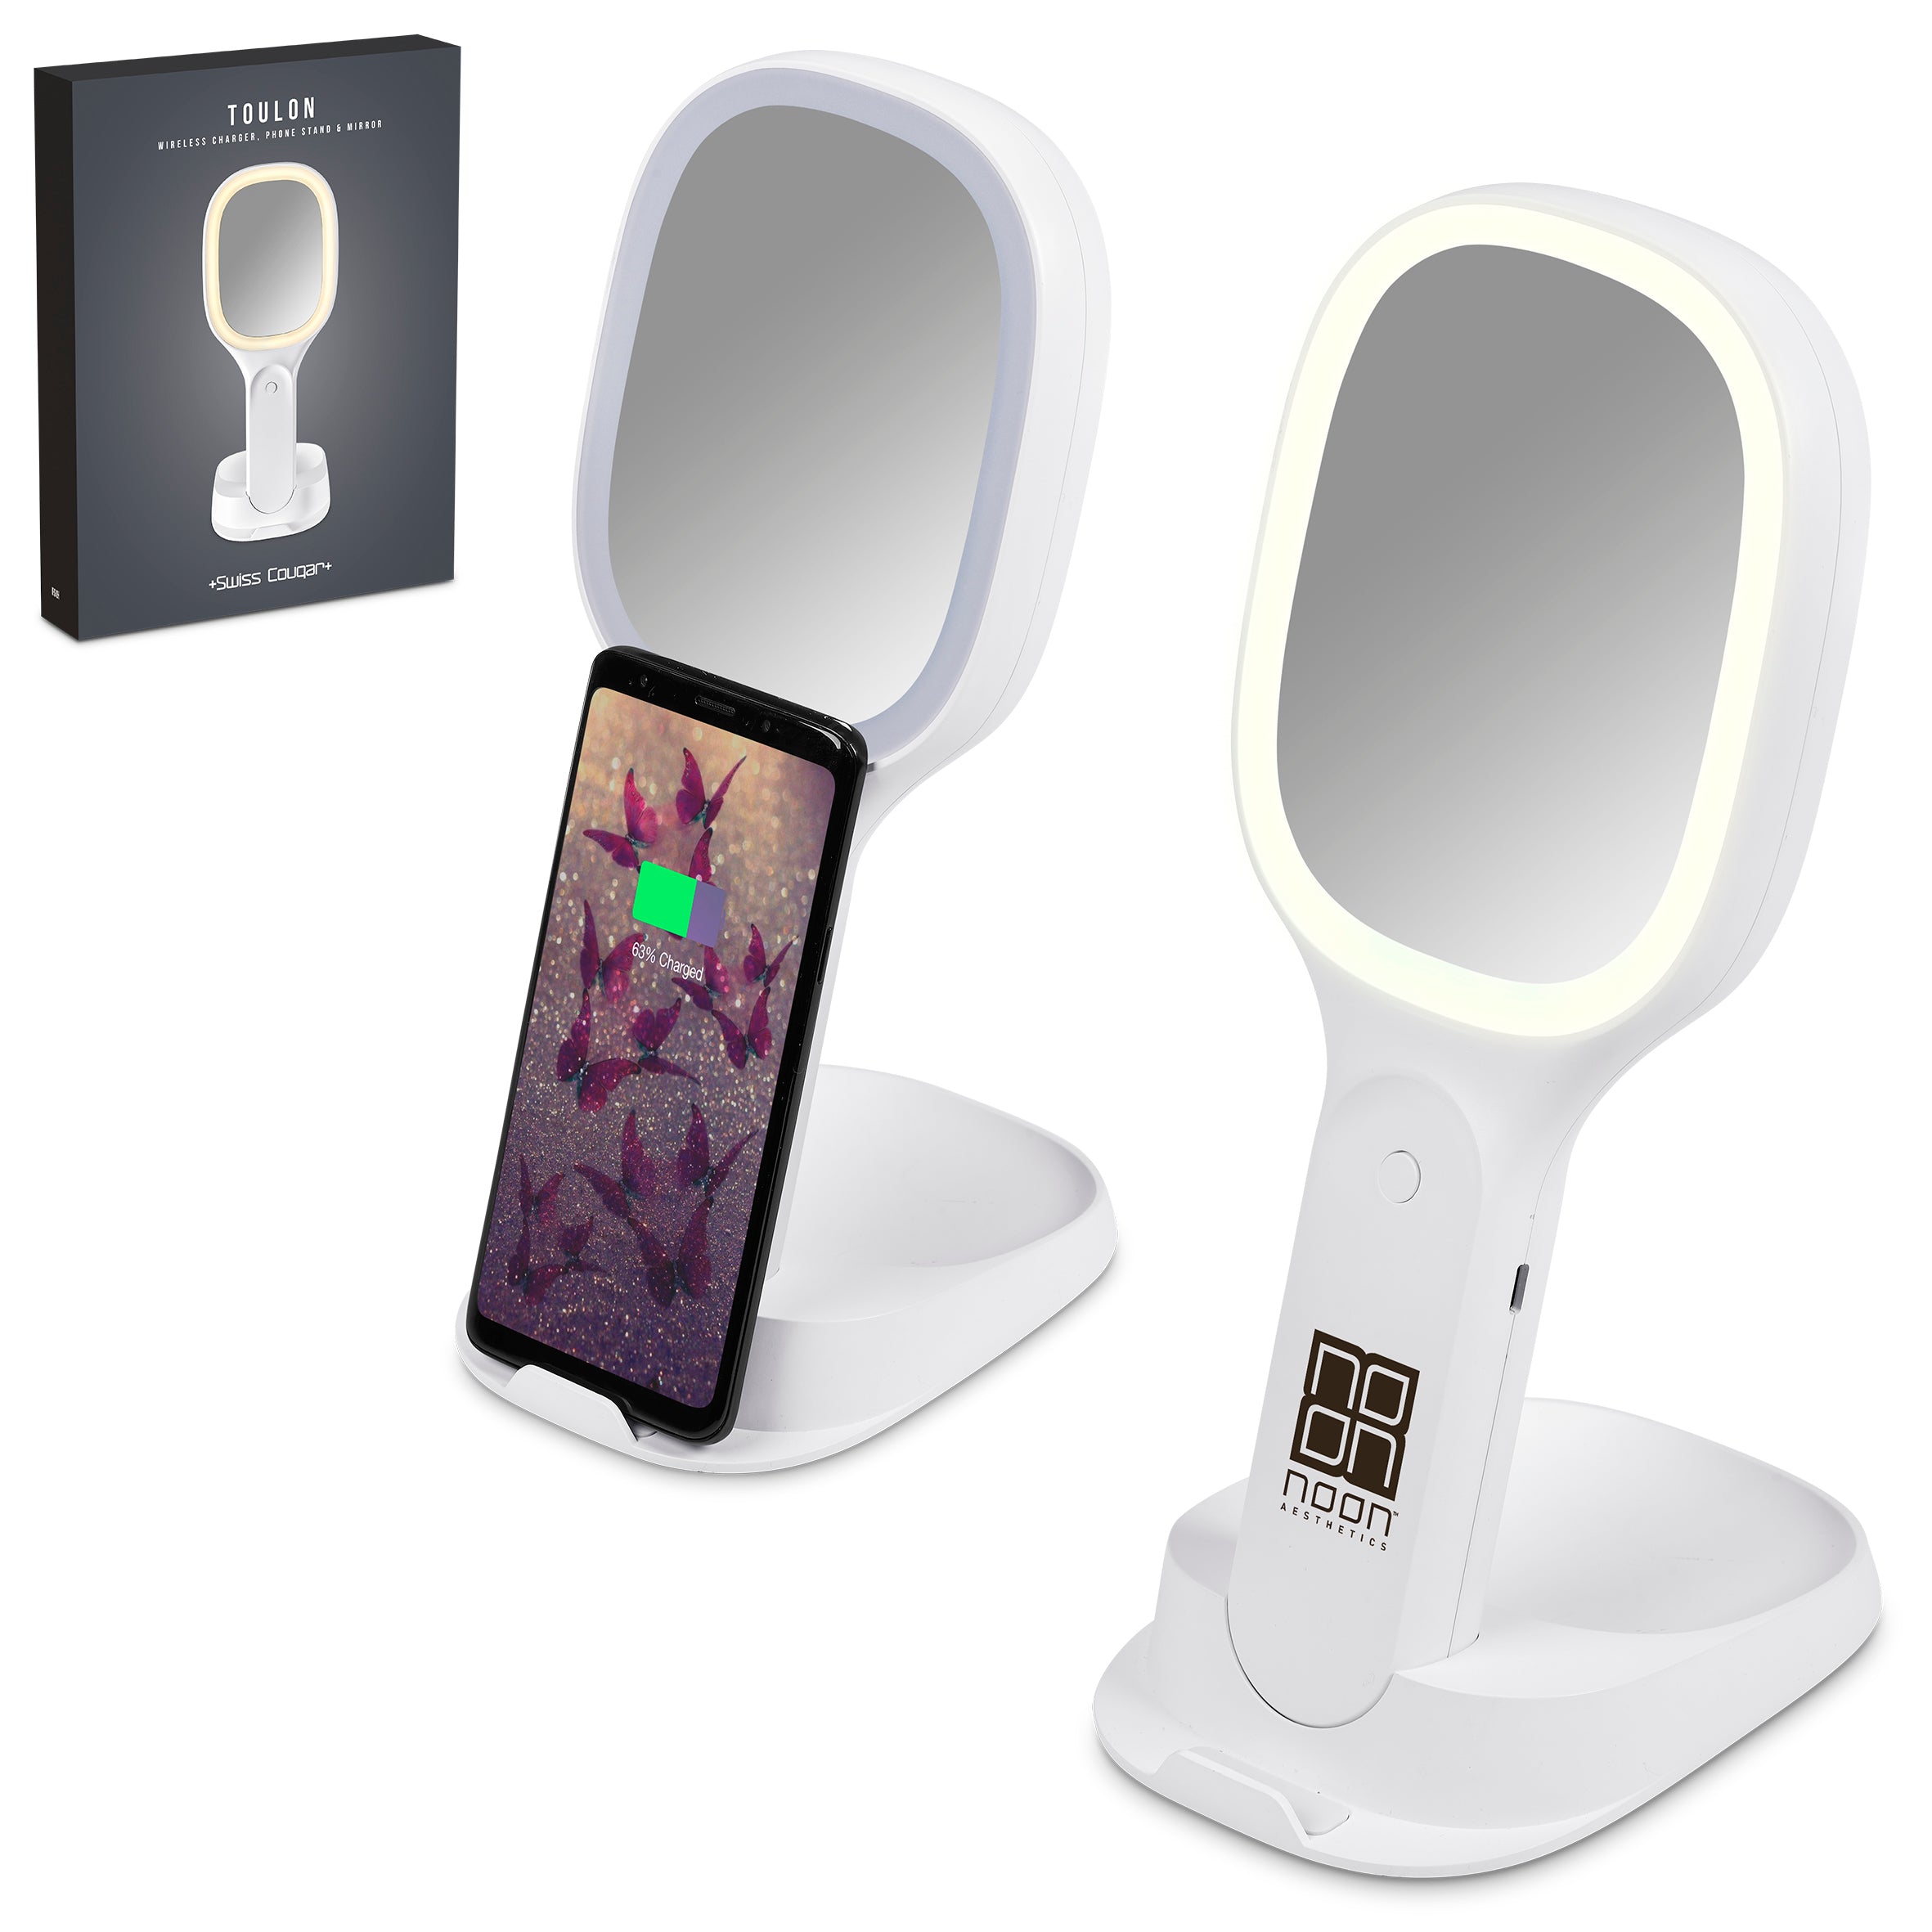 Toulon Wireless Charger, Phone Stand & Portable Mirror